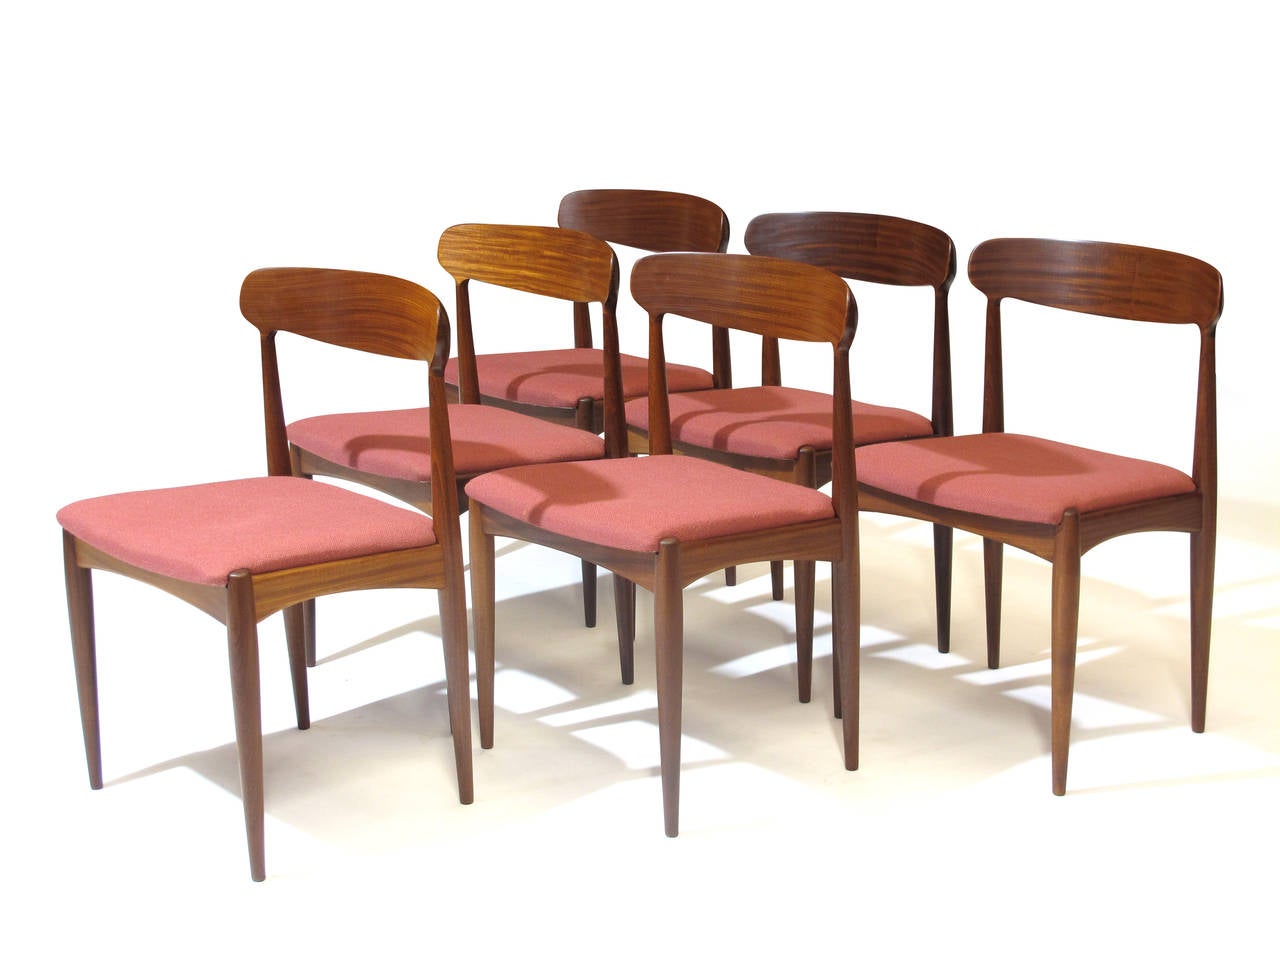 Six Mid-Century dining chairs designed by Johannes Andersen with beautifully grained, solid wood curved backs and original wool seats.